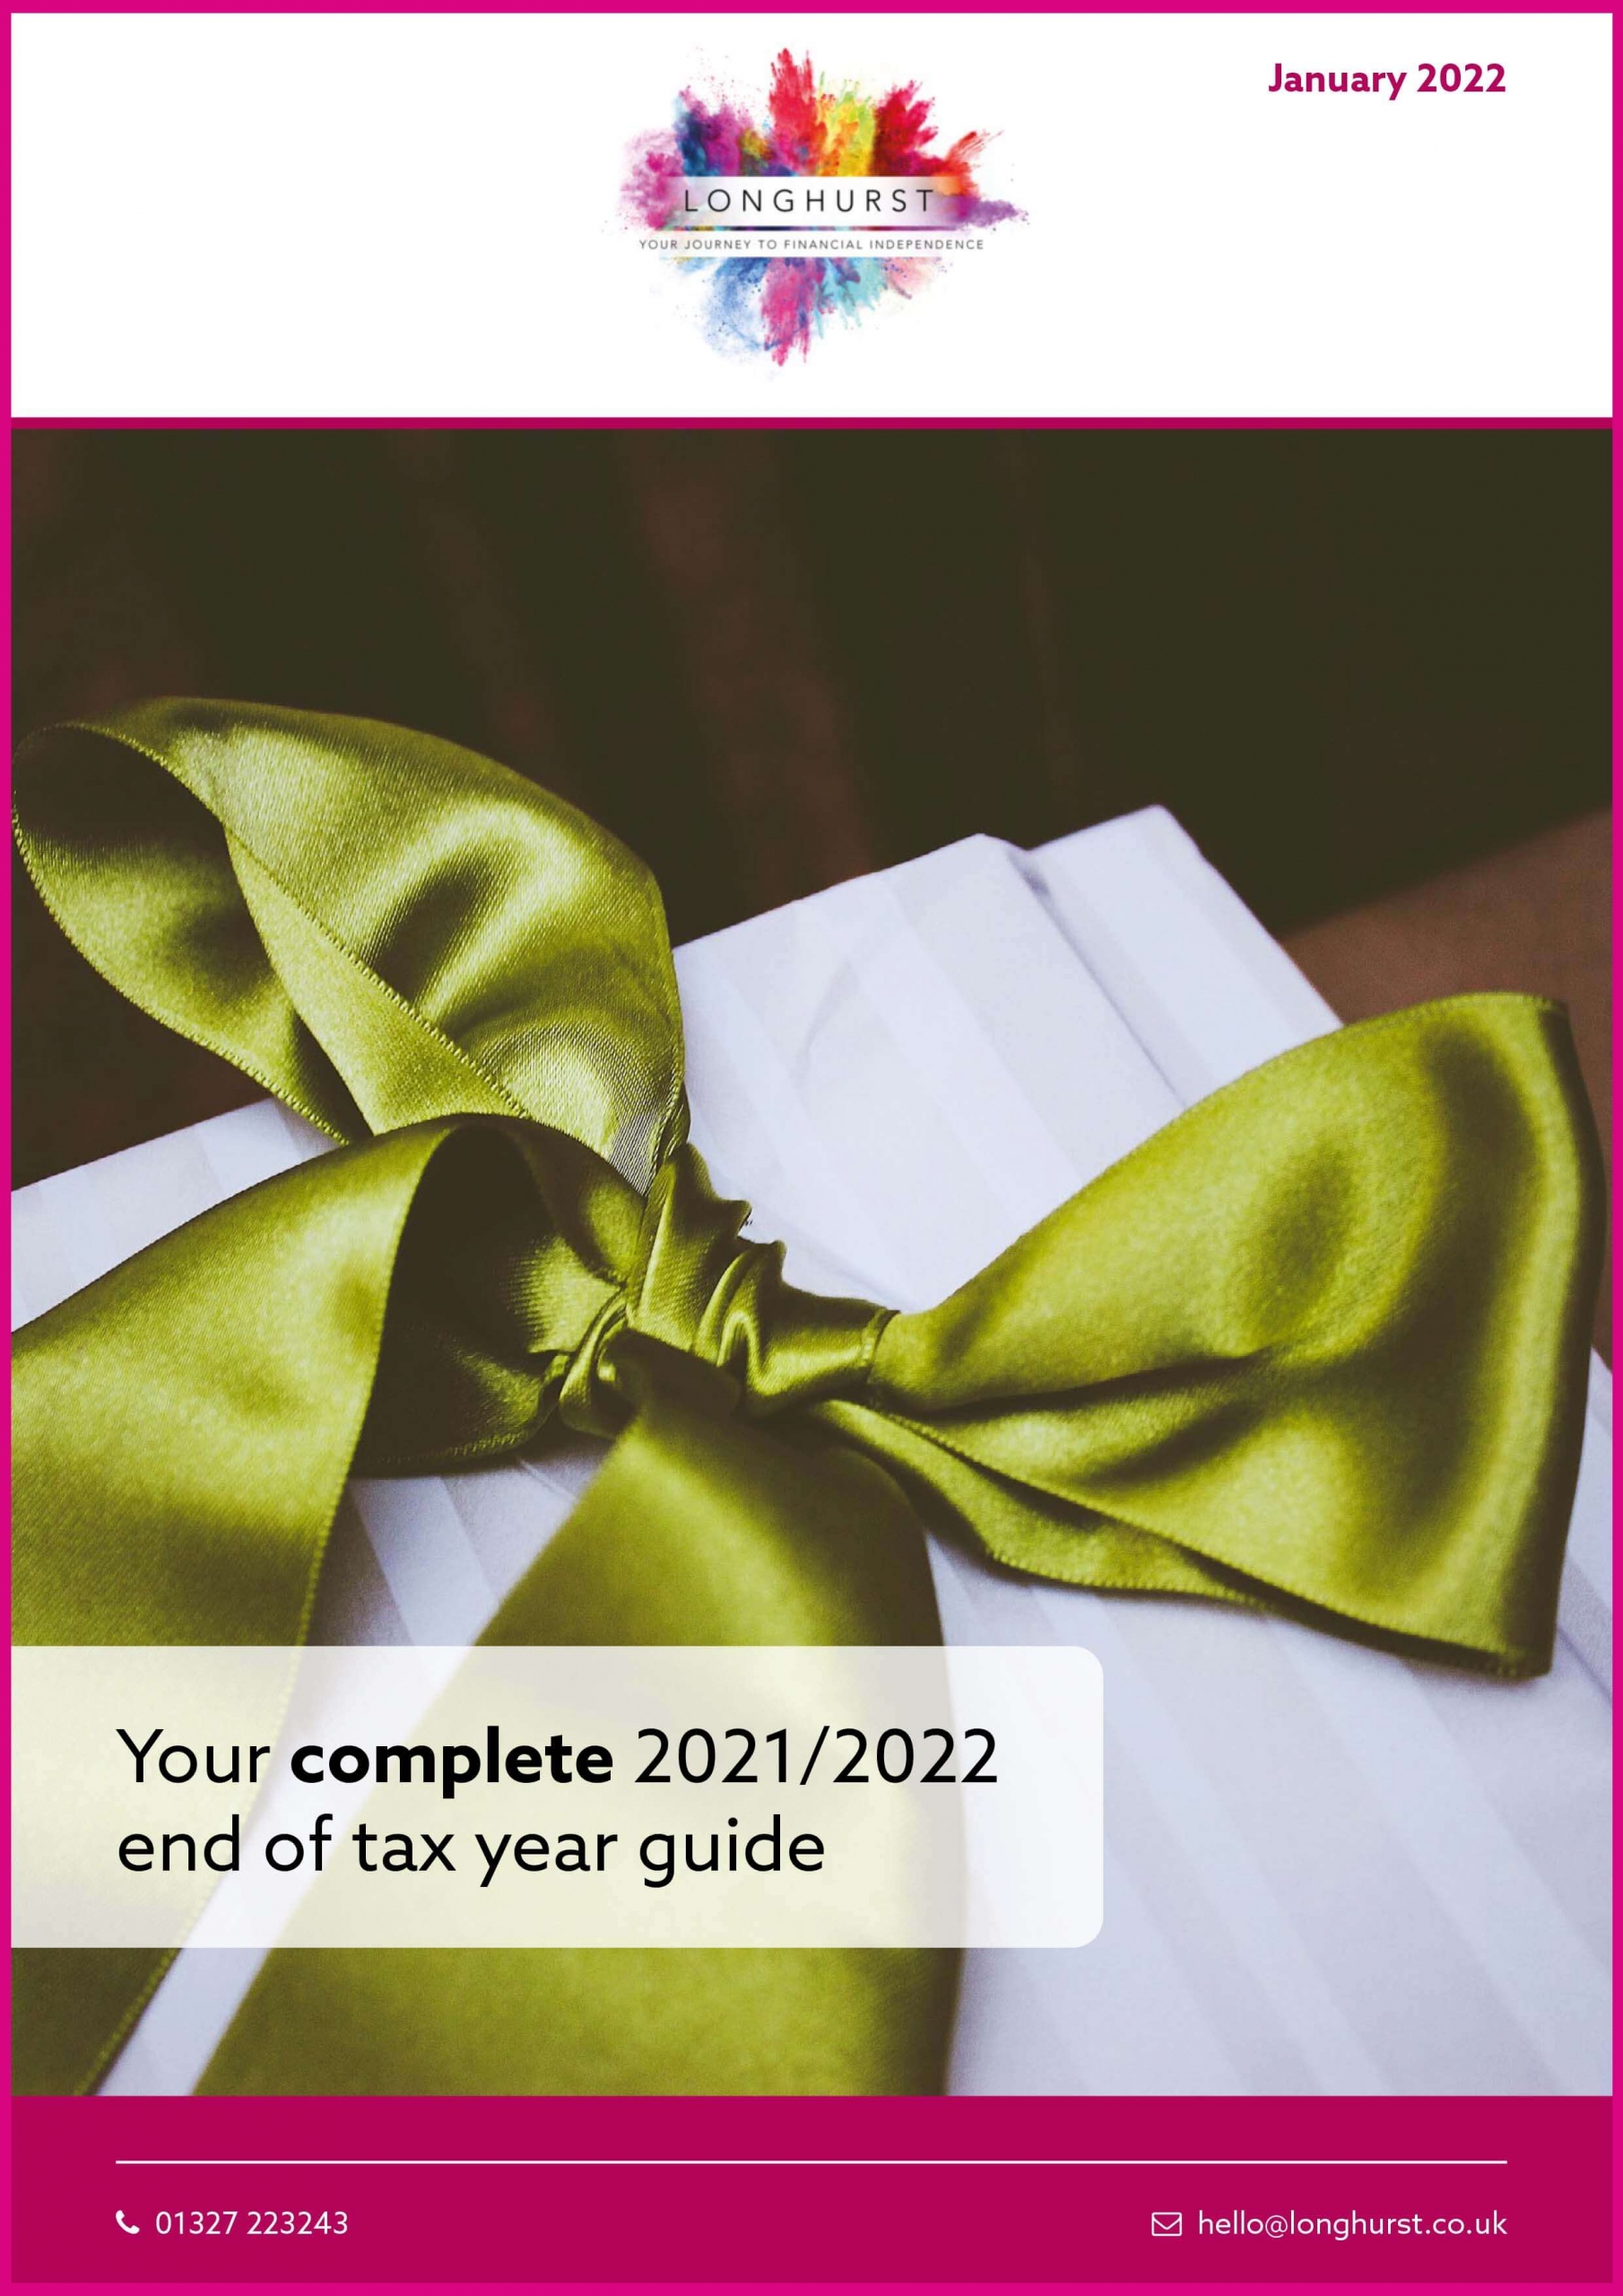 Longhurst - End of Tax Year Guide